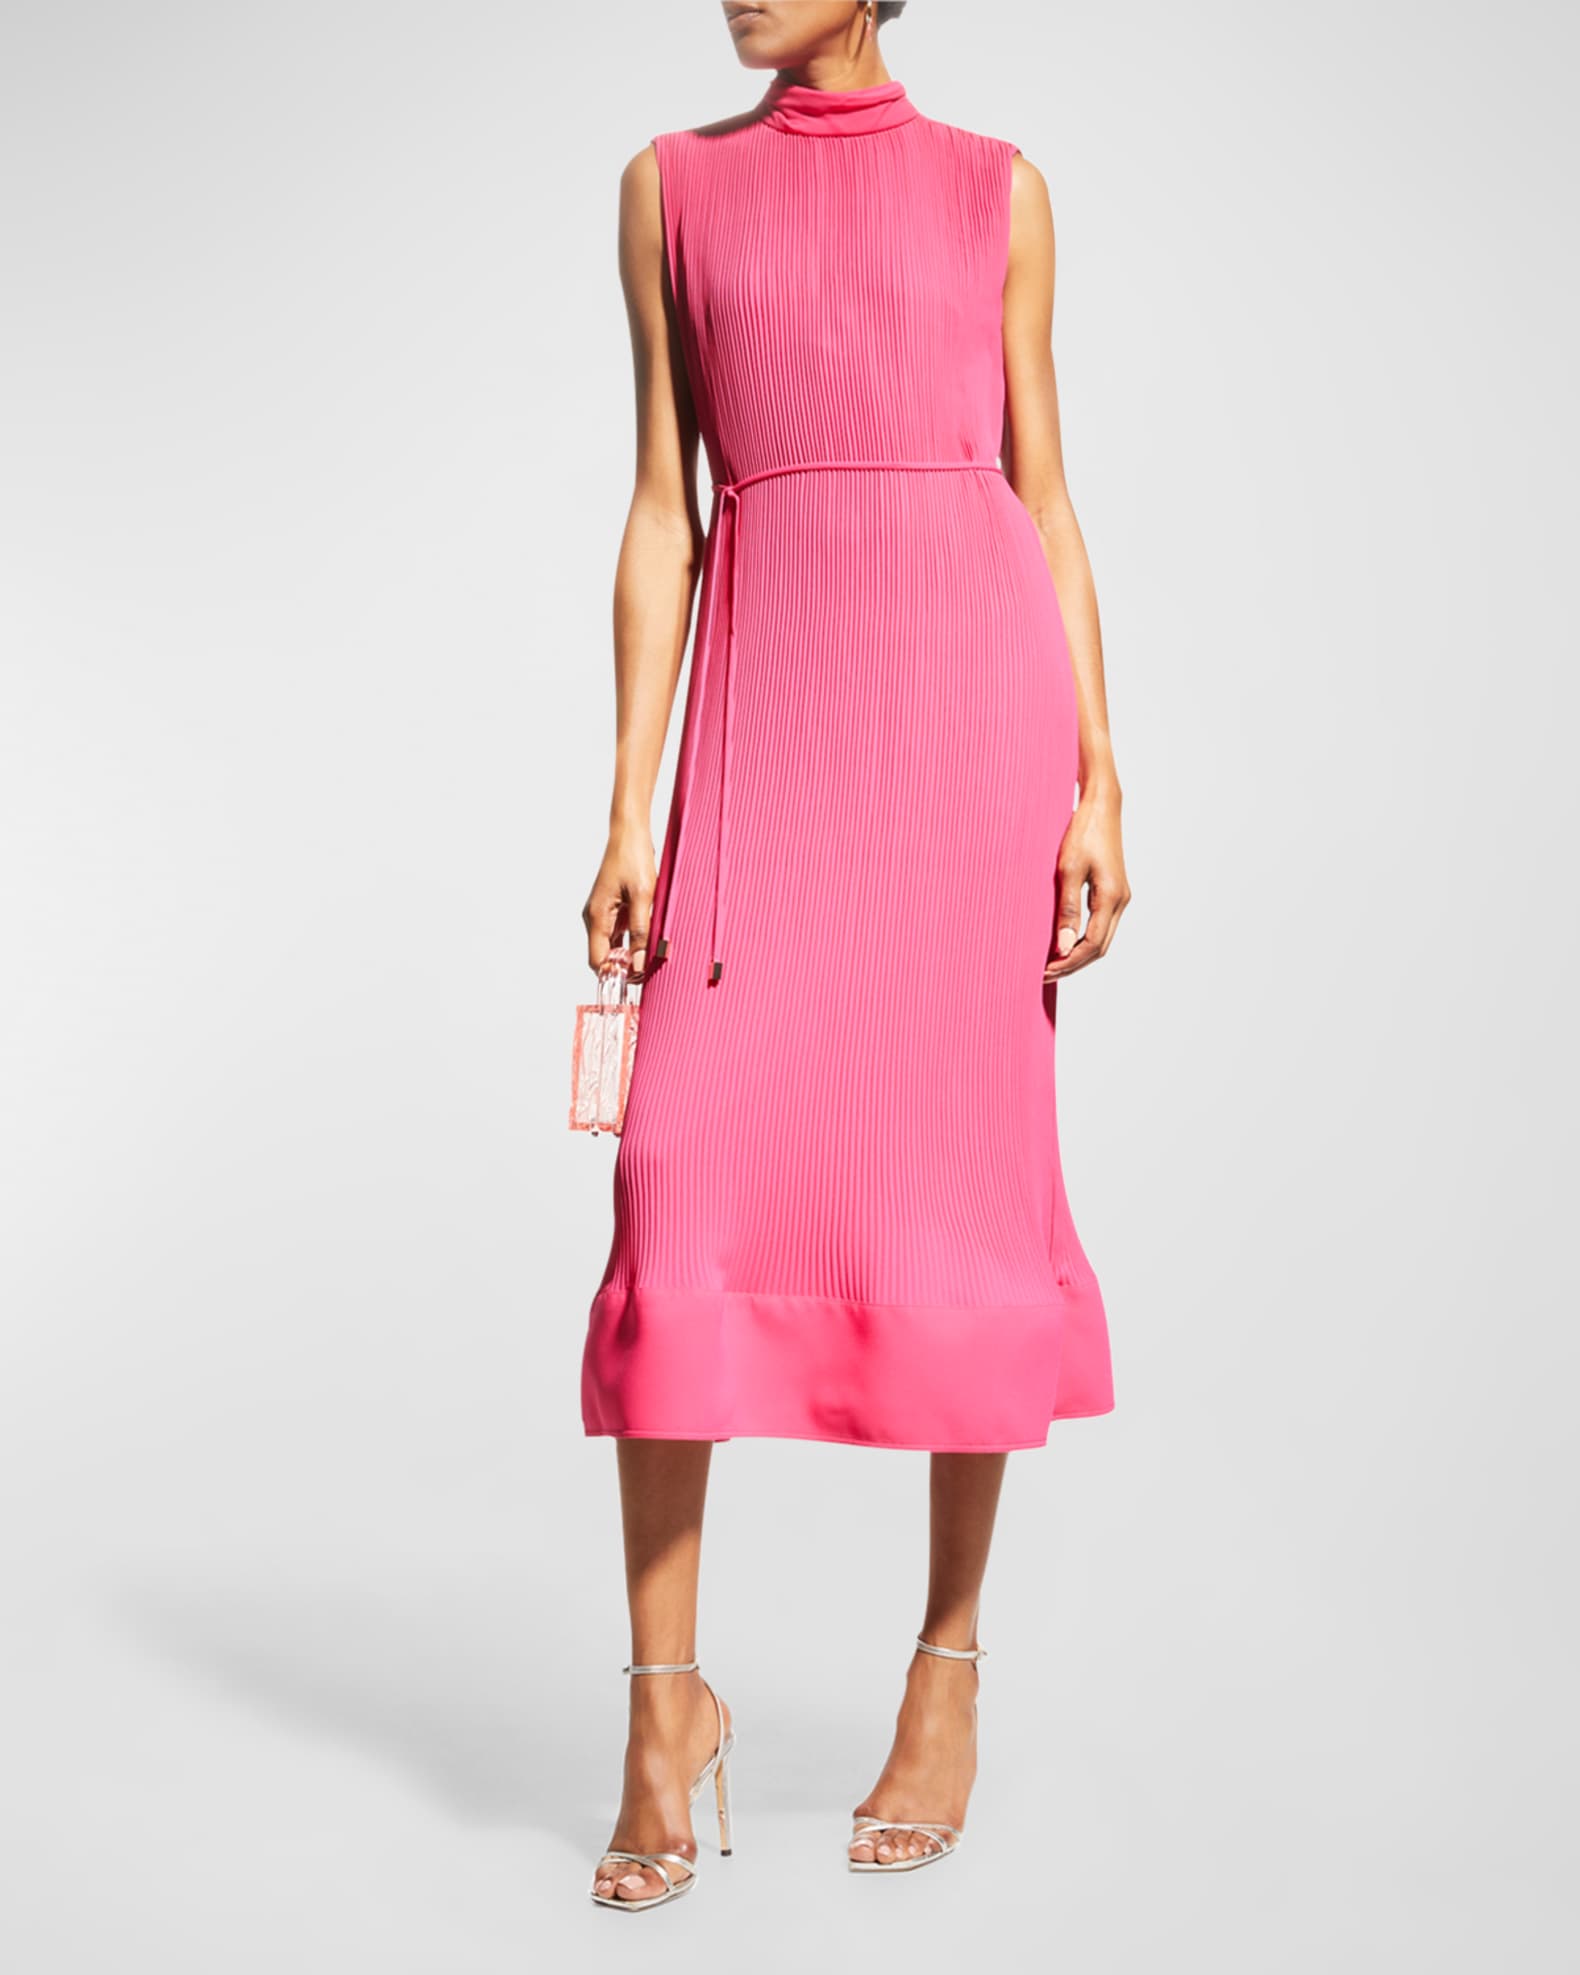 Milly Melina Solid Pleated Dress | Neiman Marcus